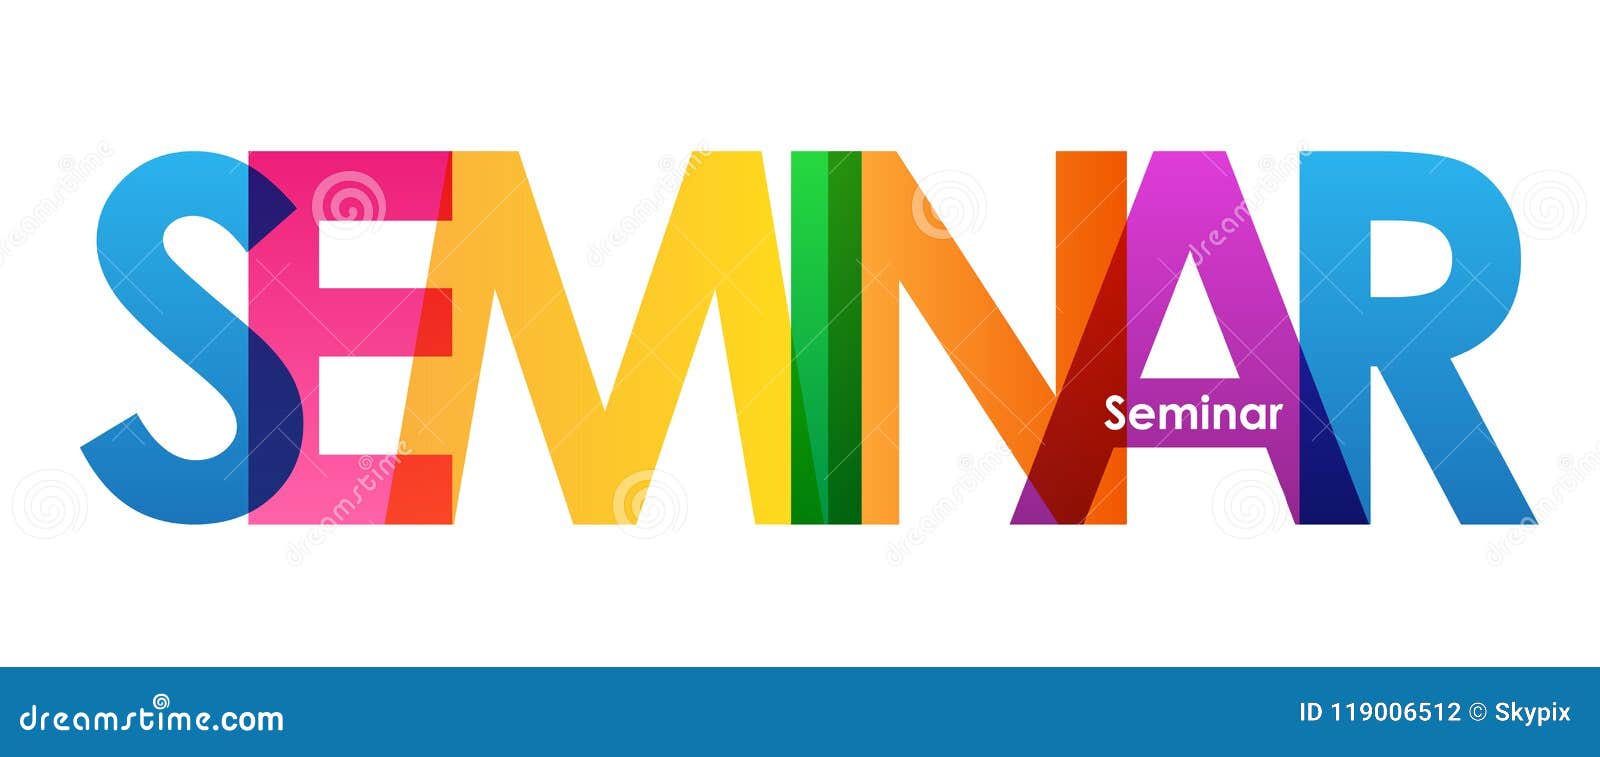 Seminar Colorful Overlapping Letters Vector Banner Stock